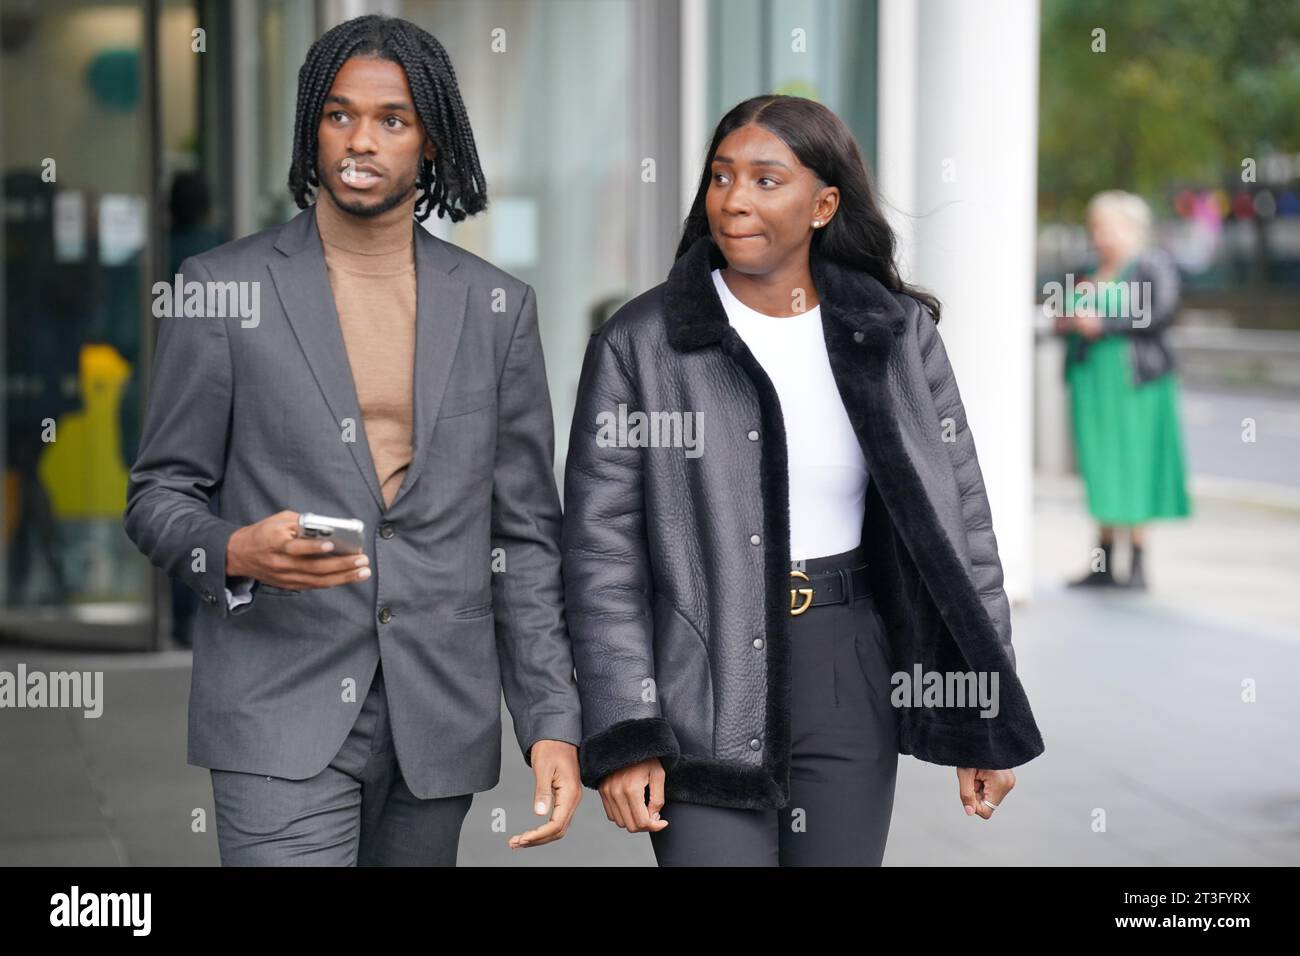 Athletes Bianca Williams and Ricardo Dos Santos walking to speak to the media outside Palestra House, central London, after the judgement was given for the gross misconduct hearing of five Metropolitan Police officers over their stop and search. The disciplinary hearing has found the behaviour of two Metropolitan Police officers - Pc Jonathan Clapham and Pc Sam Franks - amounted to gross misconduct. Acting Police Sergeant Rachel Simpson, Pc Allan Casey and Pc Michael Bond were found not to have breached any standards. Ms Williams and Mr Dos Santos were stopped and handcuffed in Maida Vale, nor Stock Photo